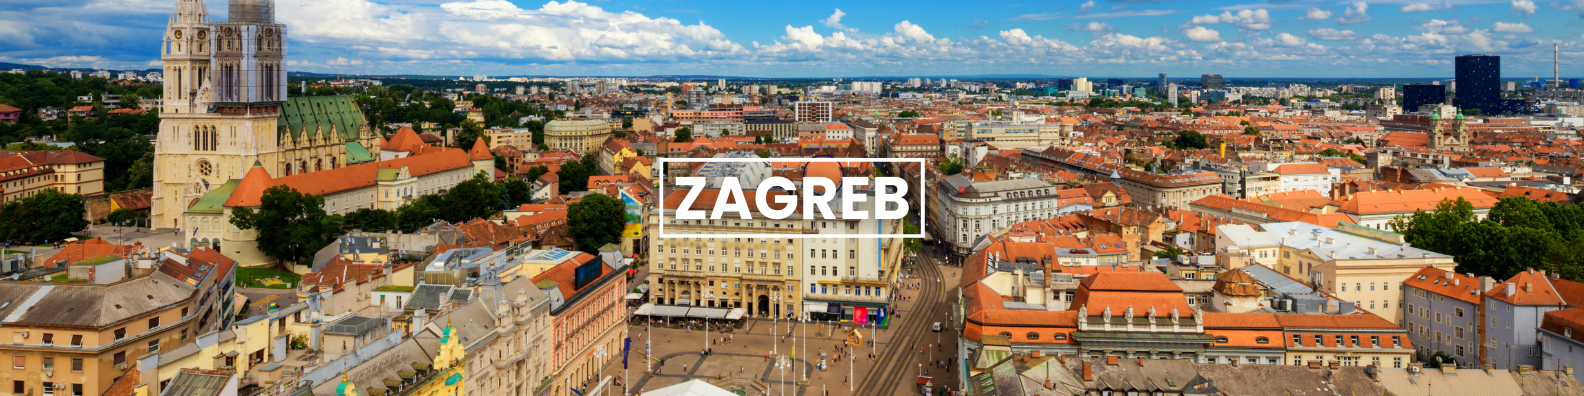 an aerial view of a city with the word zagreb on it . Barter's Travelnet 